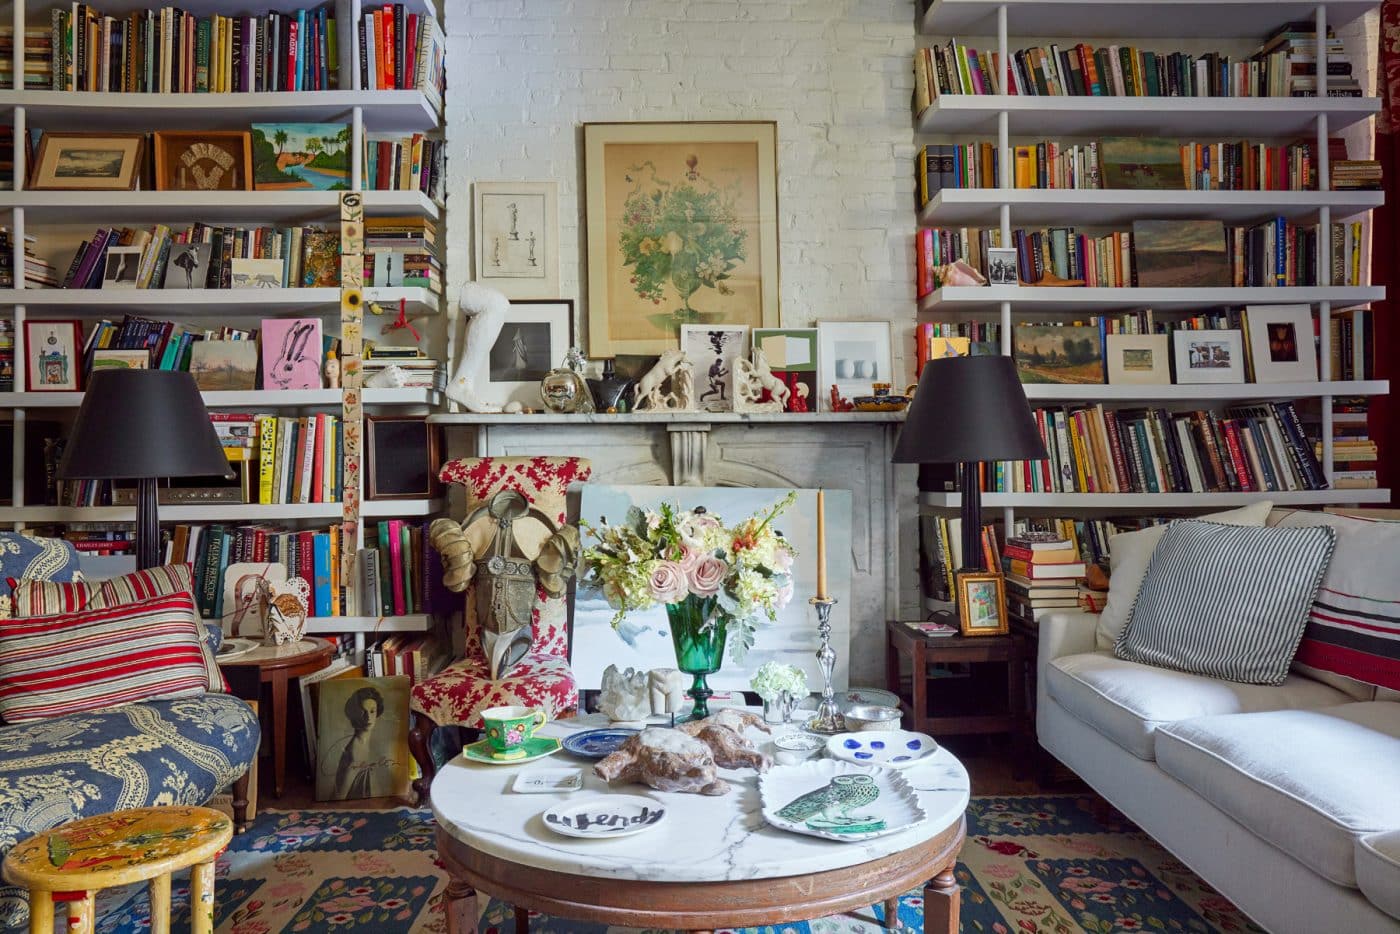 Wendy Goodman's living room with full bookshelves, matching lamps, and colorful plates